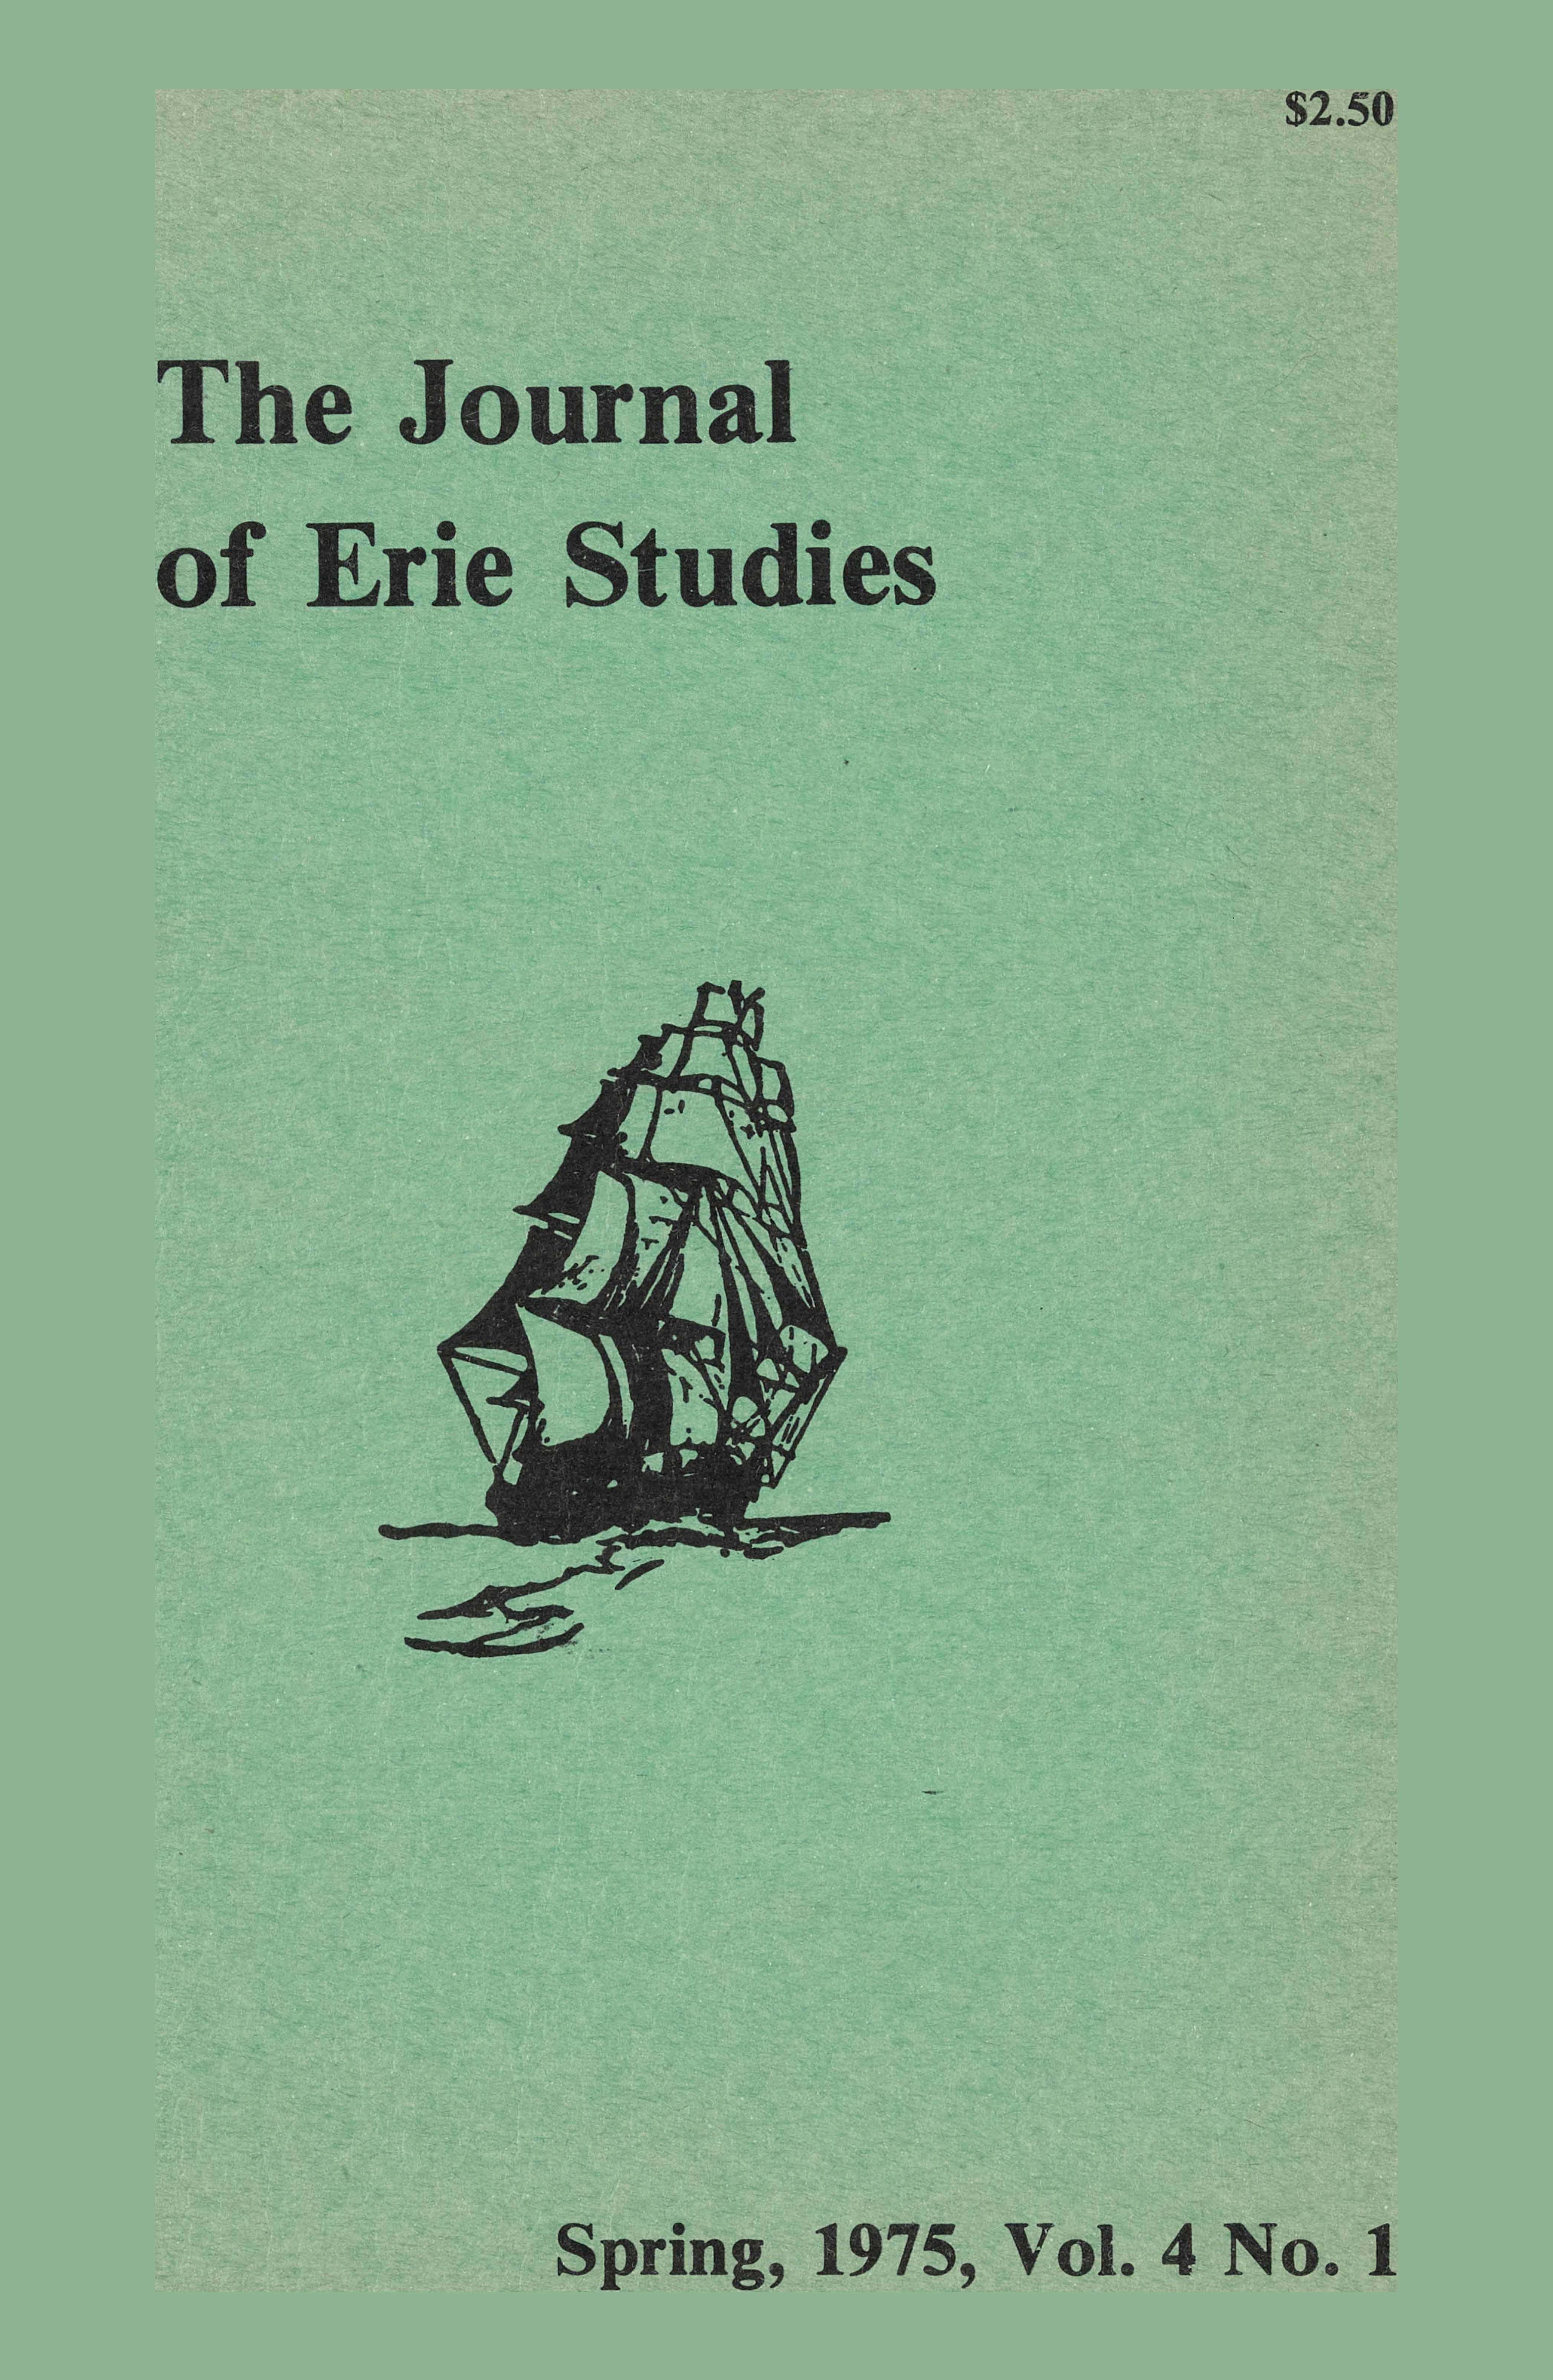 Sketch of a ship with the text, "The Journal of Erie Studies, Spring, 1975, Vol. 4 No. 1."